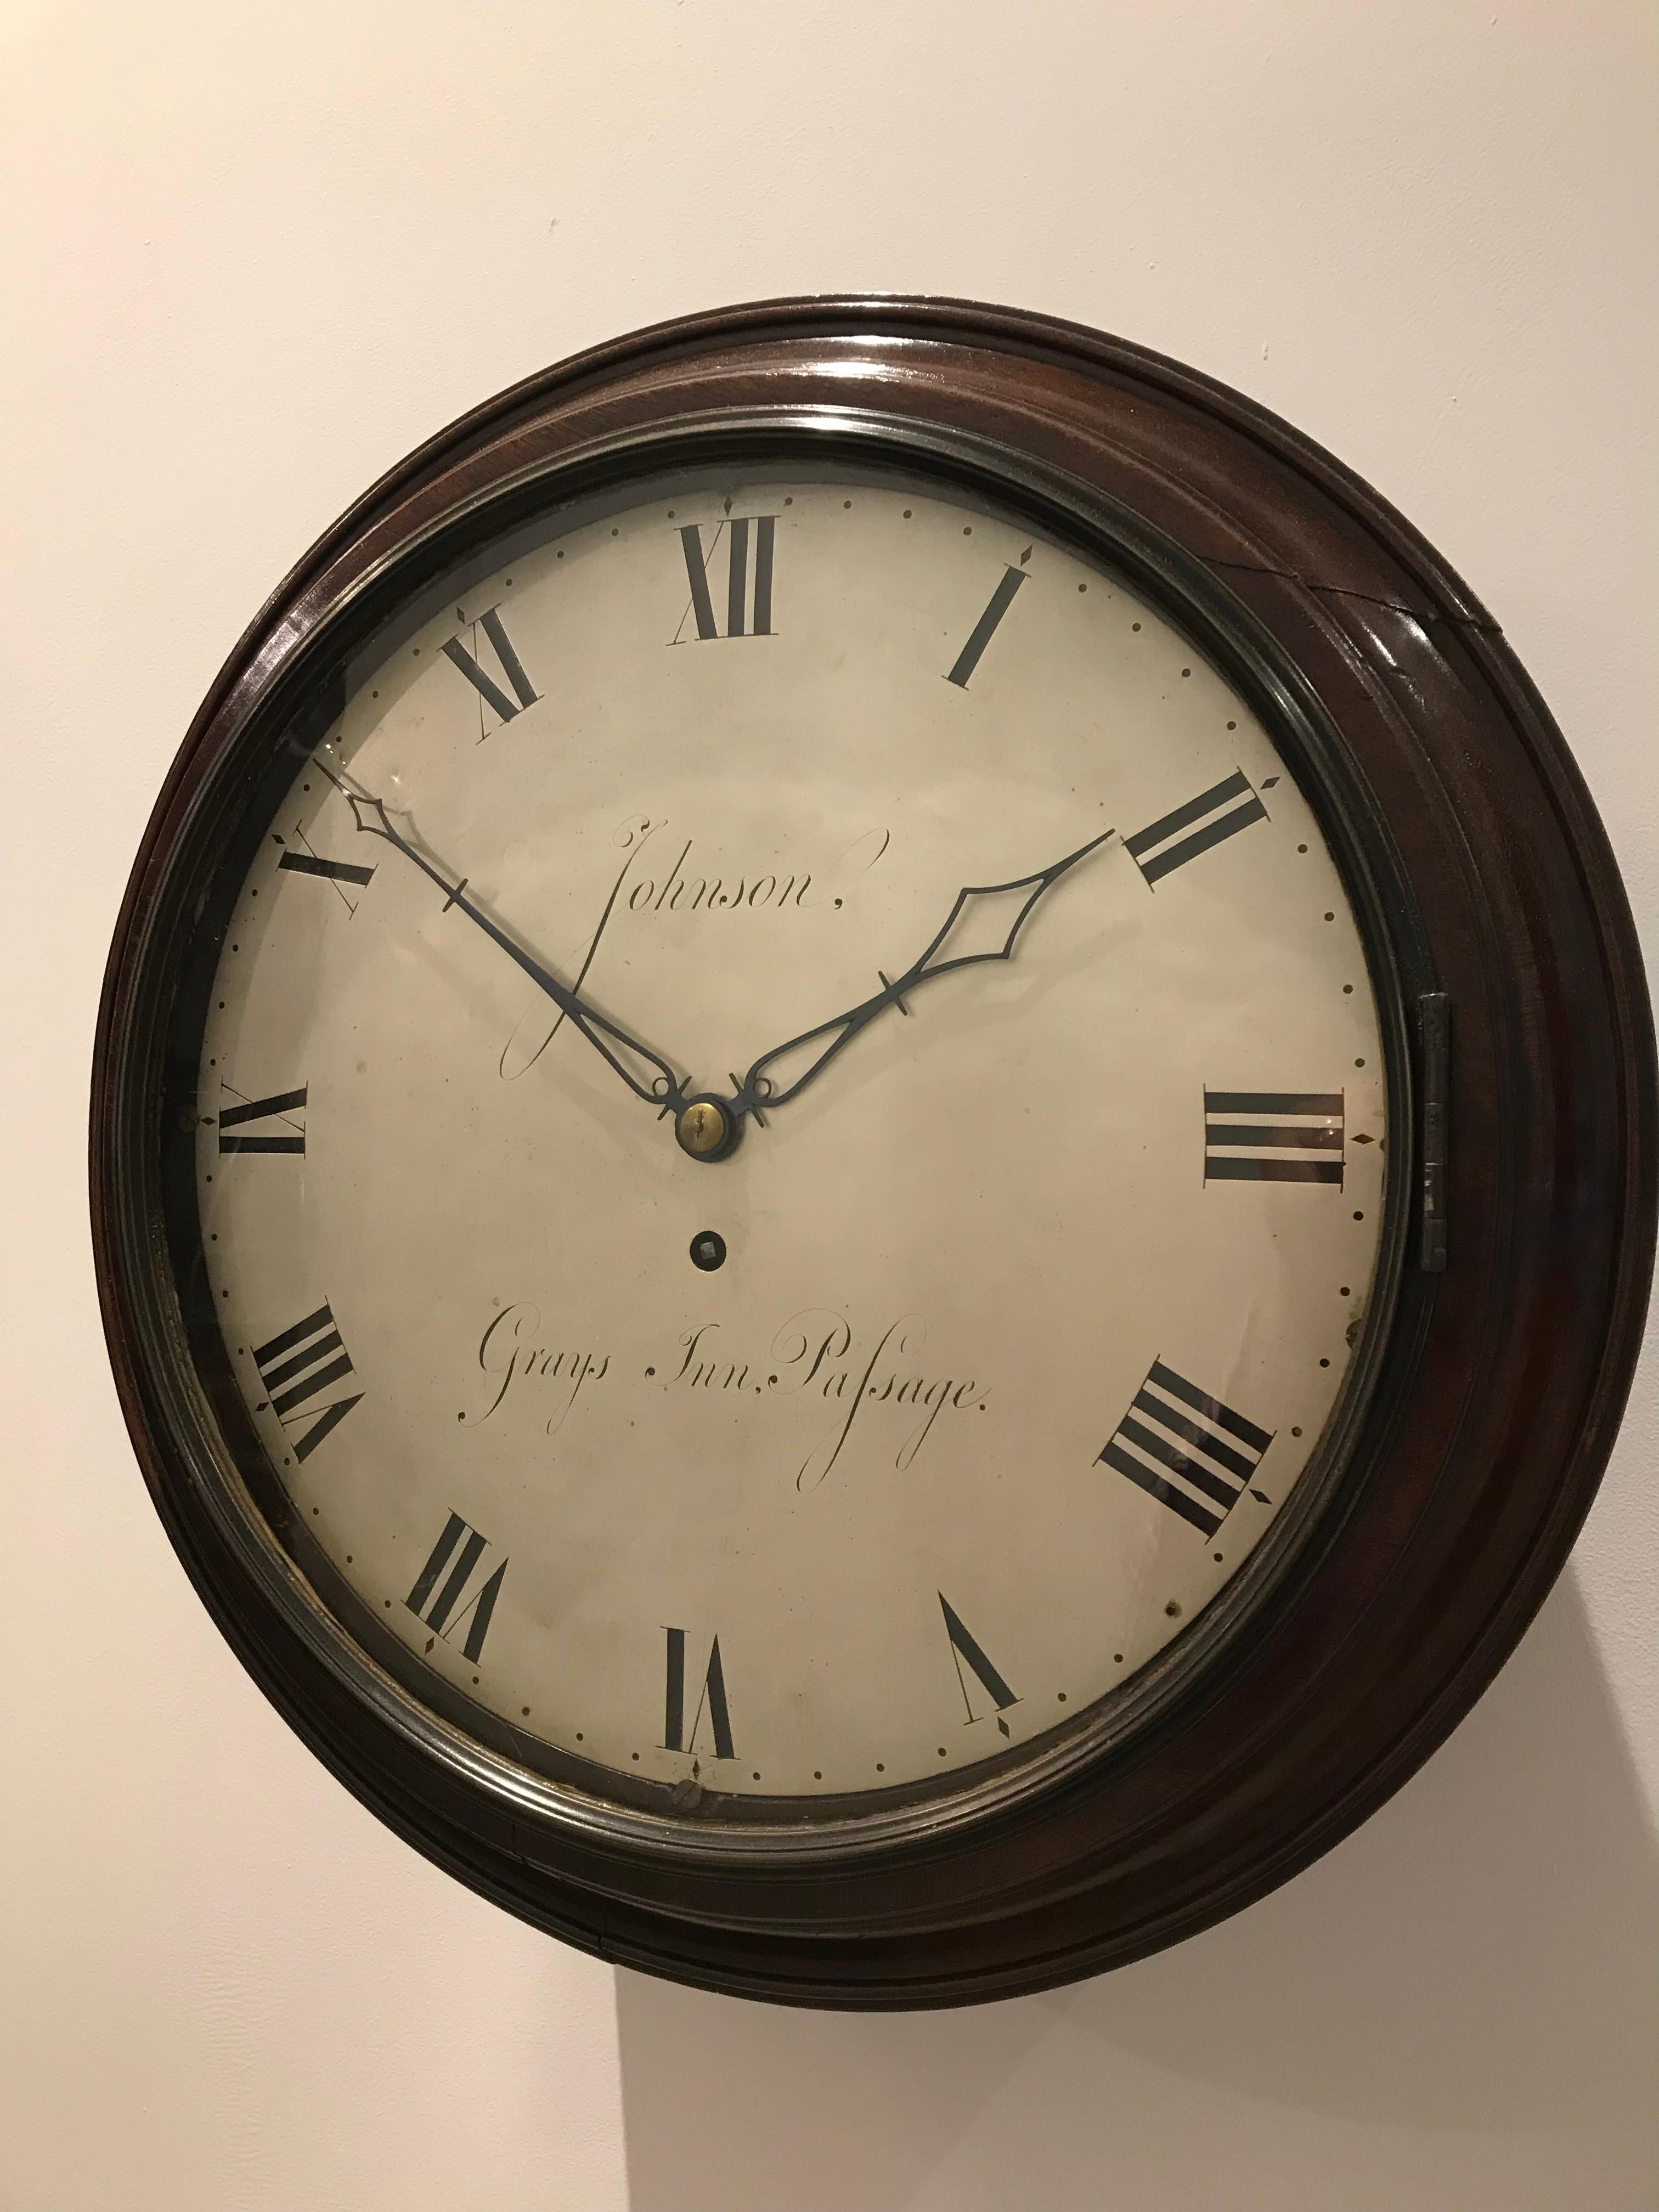 A good late Georgian English dial clock with engraved and silvered dial, salt box case and early anchor escapement. 

The case of mahogany is in the saltbox style with the backboard extended below the box. A moulded door in the bottom and a deep